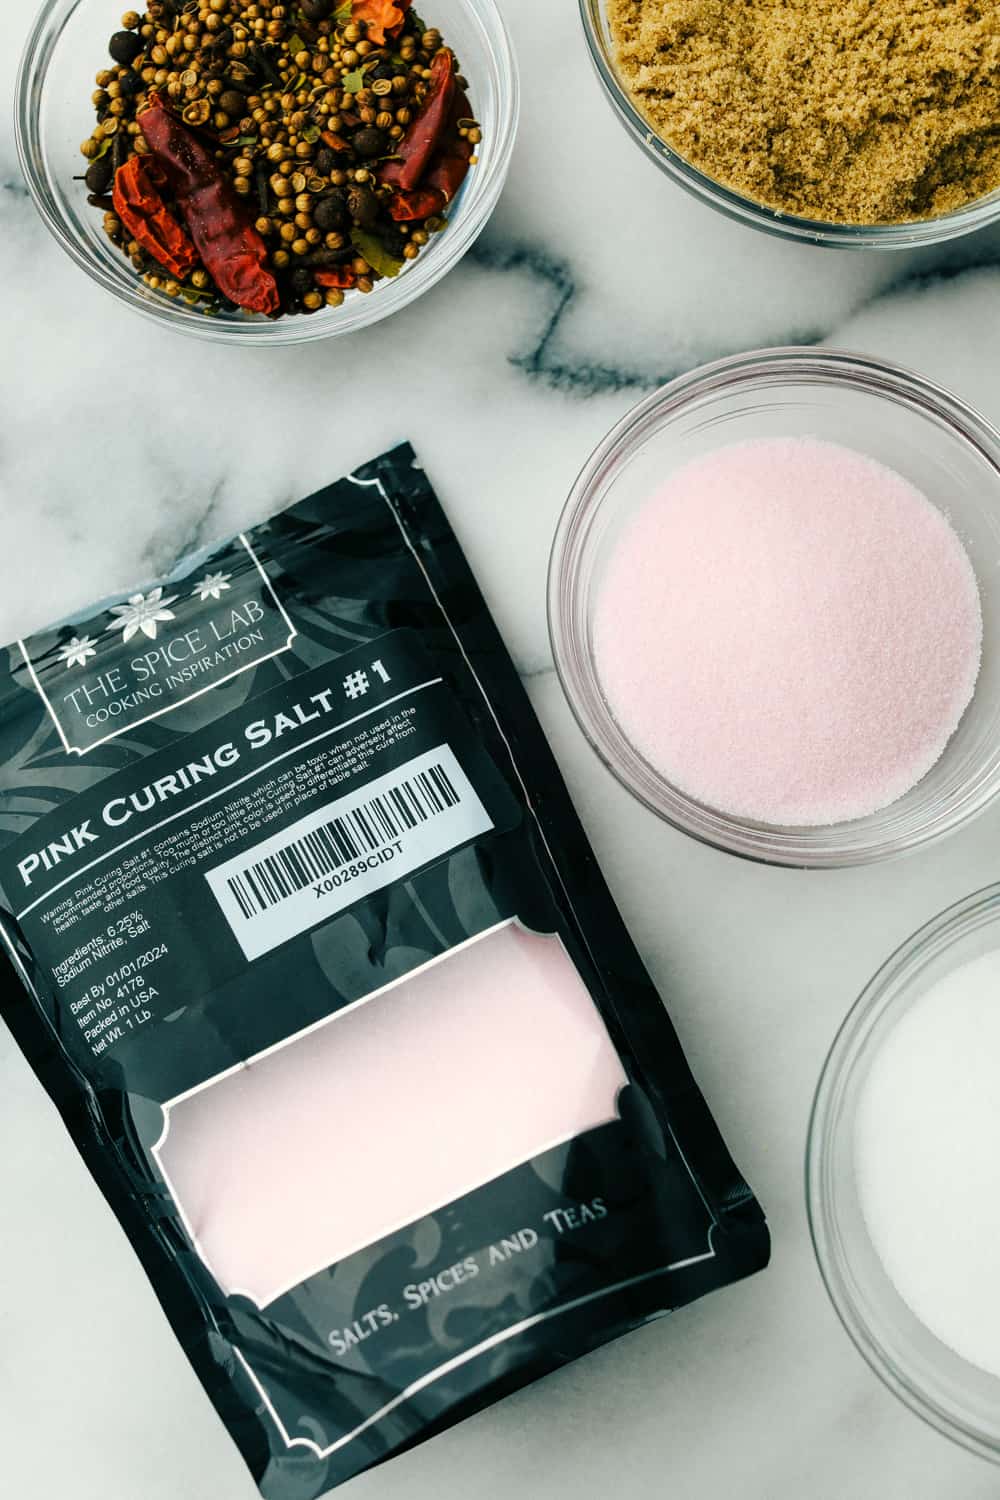 Pink curing salt #1 in a bag and bowl next to it with seasonings and brown sugar in bowls. 